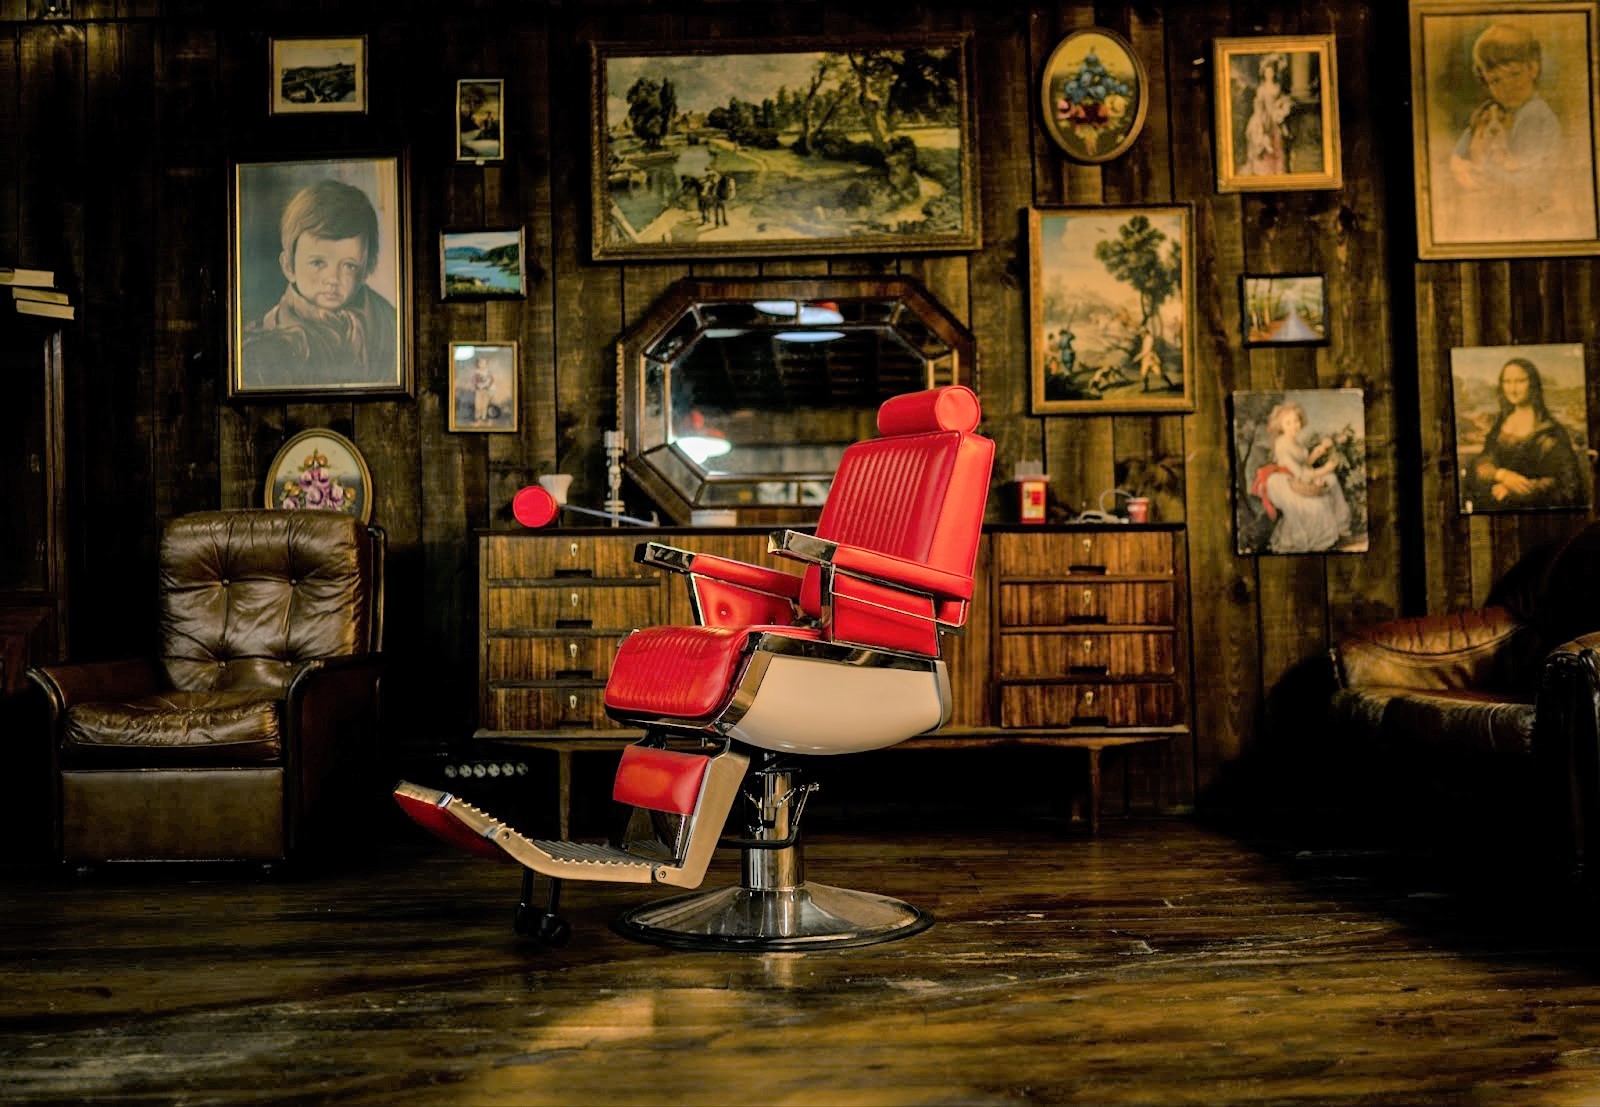 traditional barbershop with paintings on the wall and red barber chair